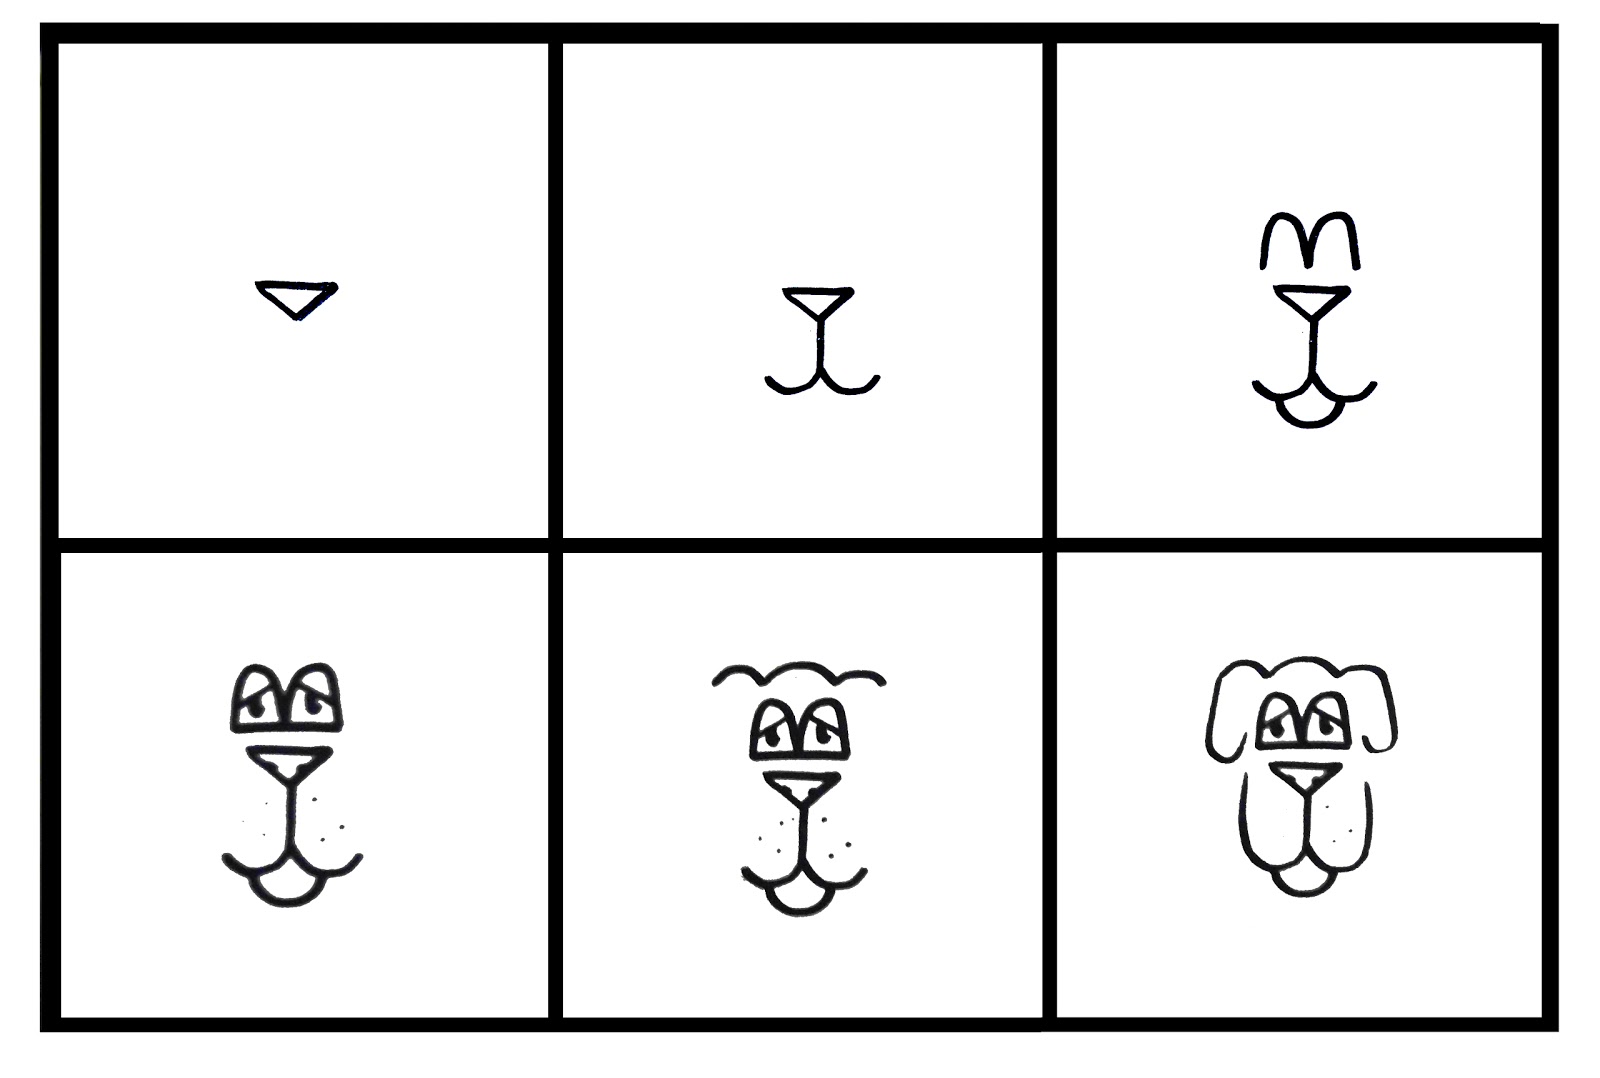 DARYL HOBSON ARTWORK How to draw a dog. Six easy steps.